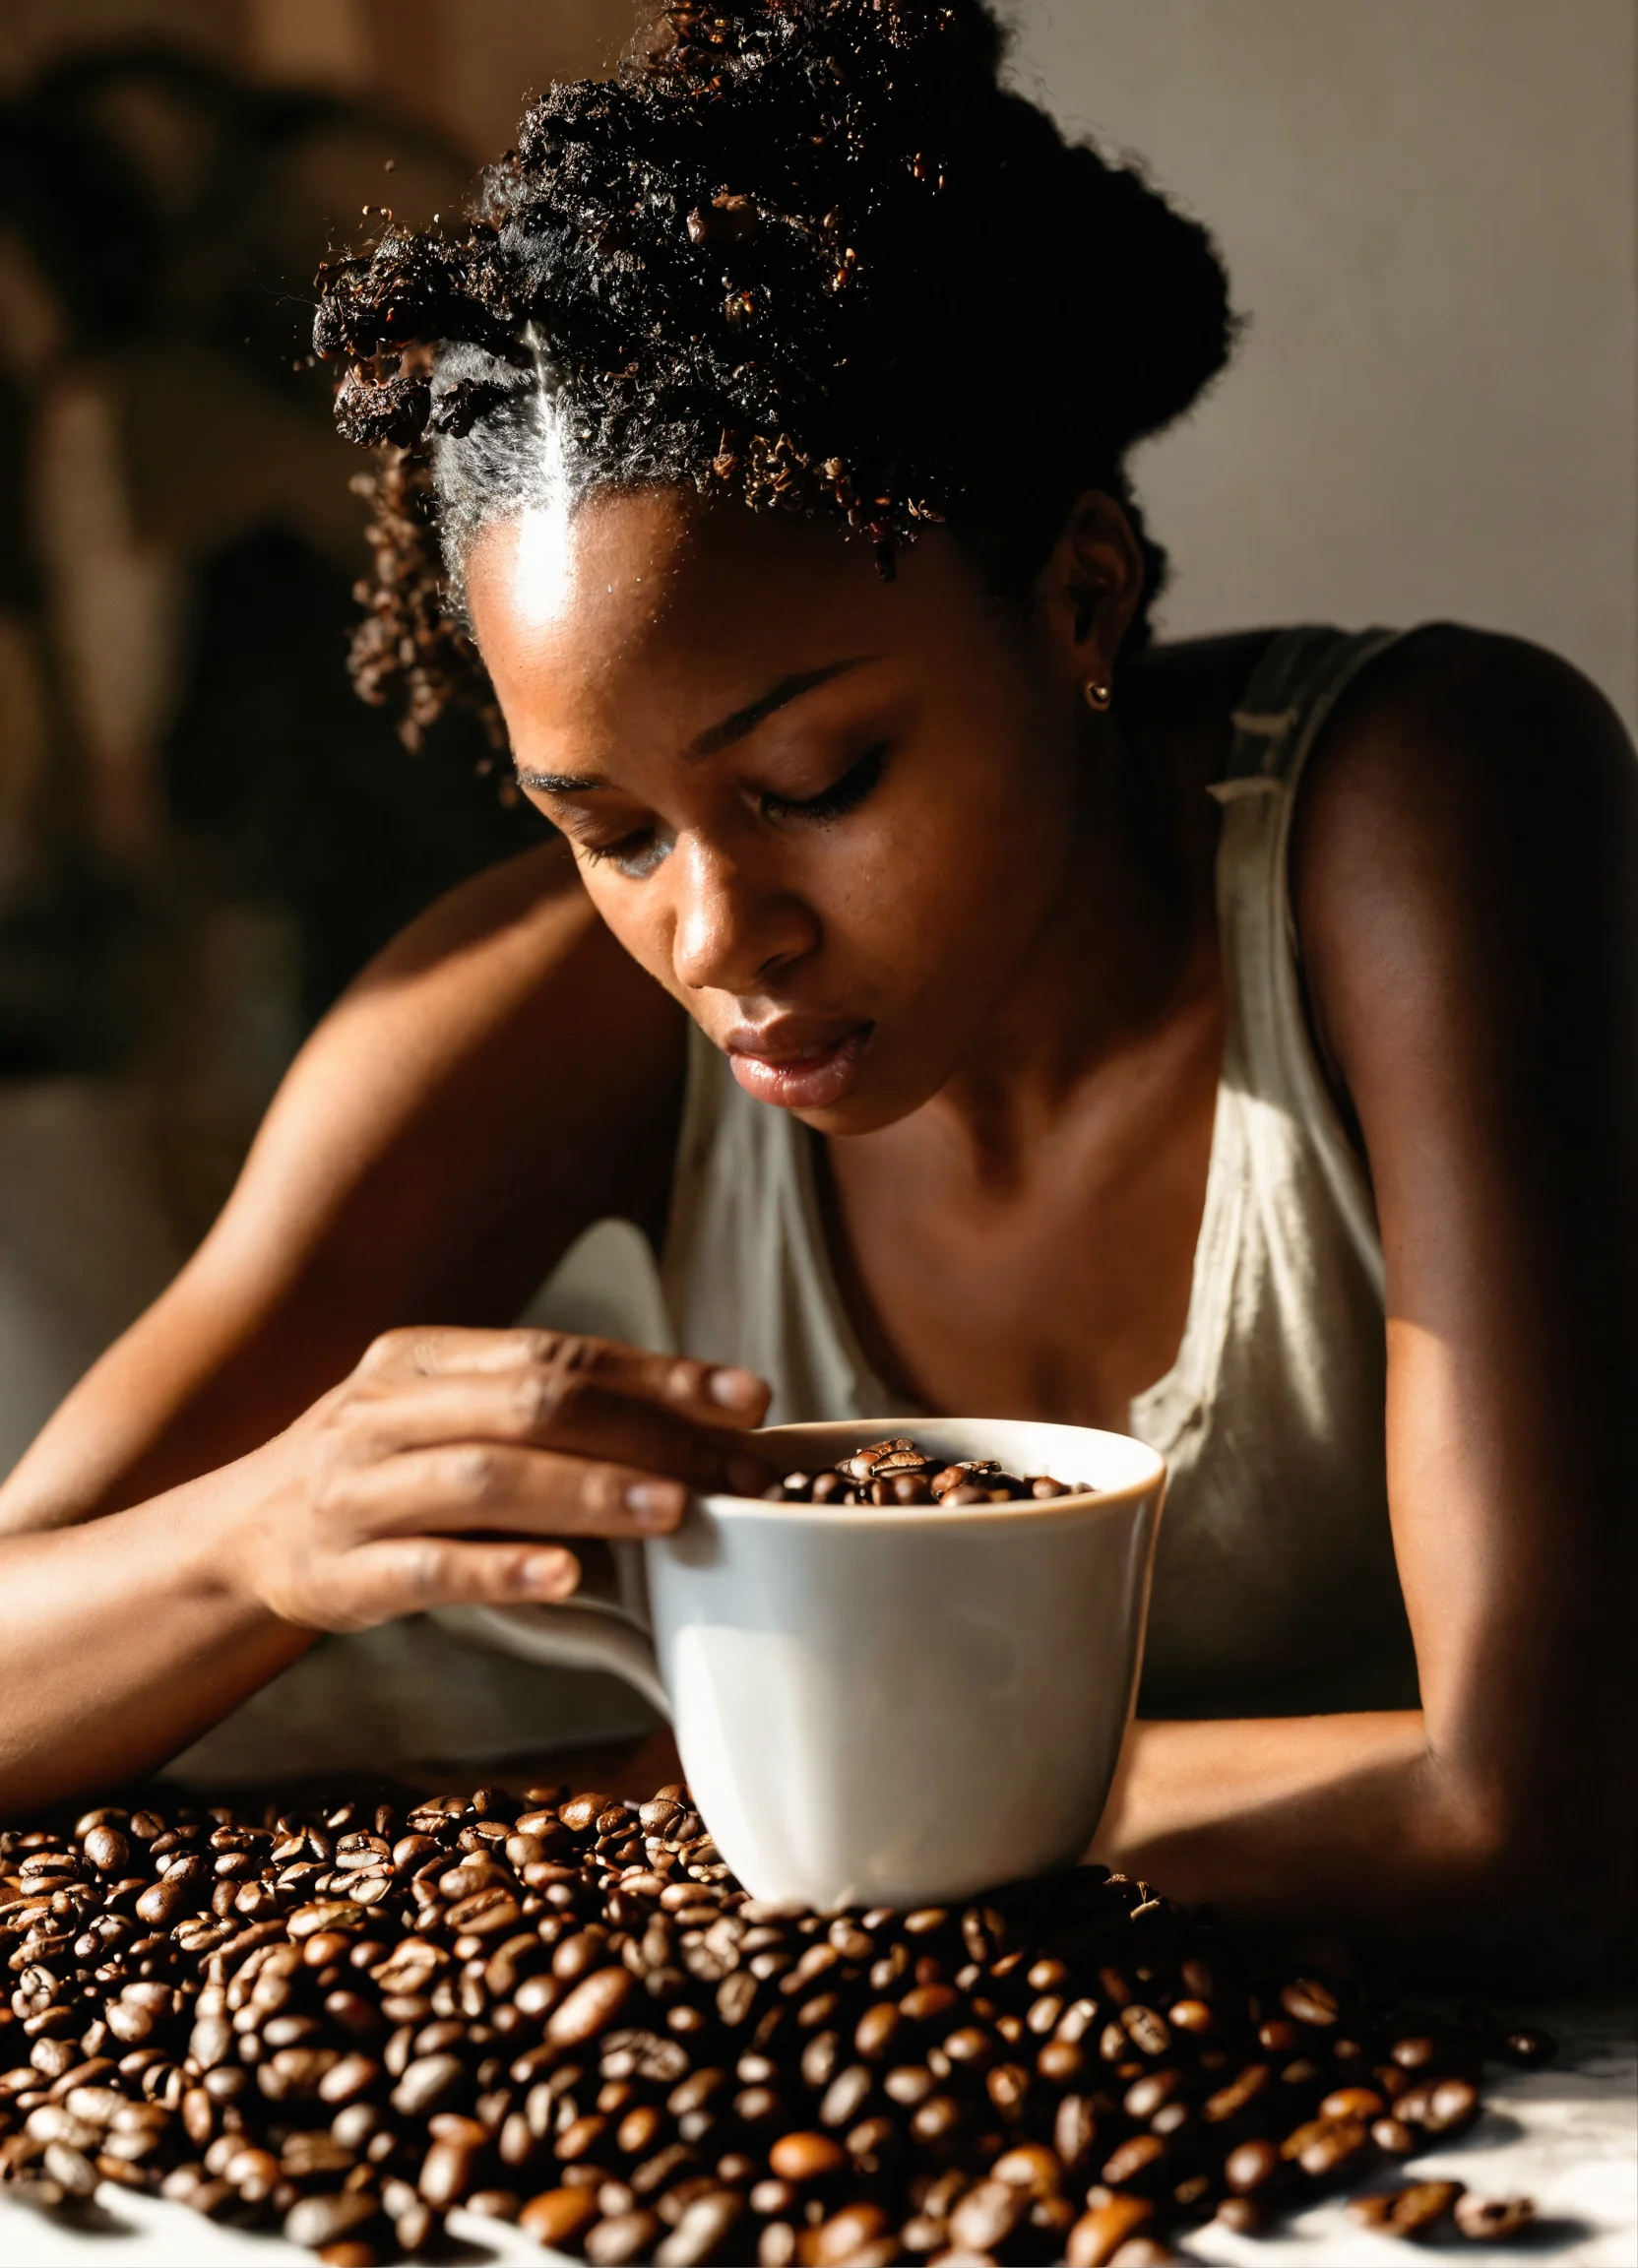 Q: Does caffeine work in skincare products?